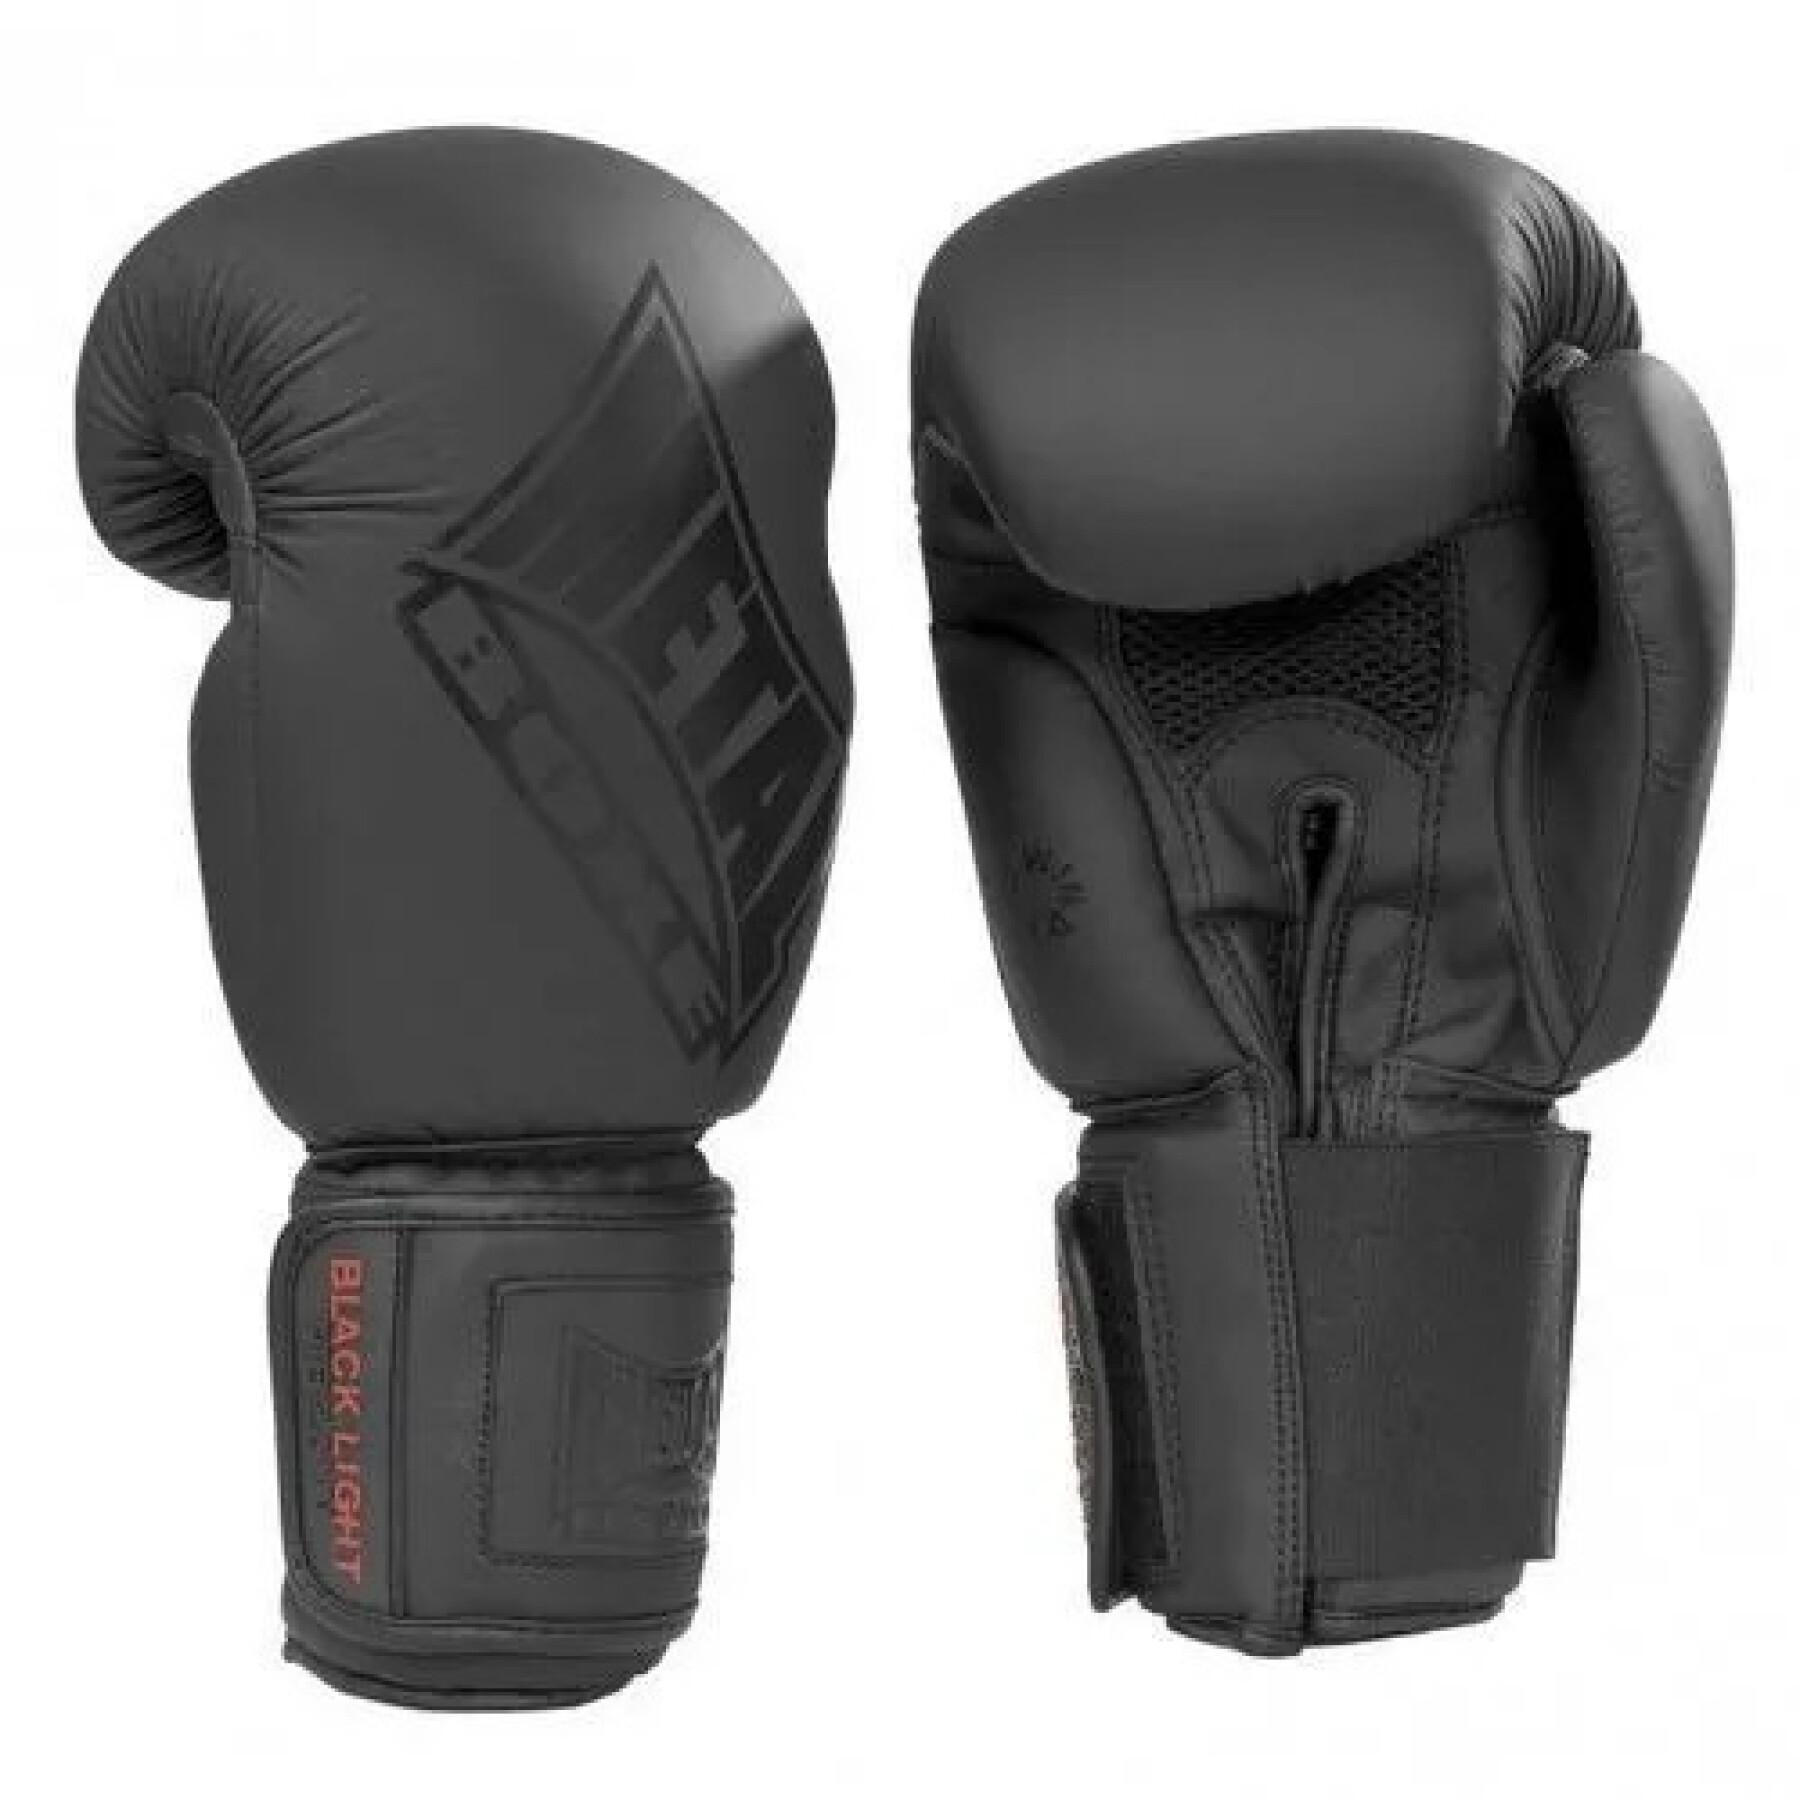 Boxhandschuhe compet Metal Boxe